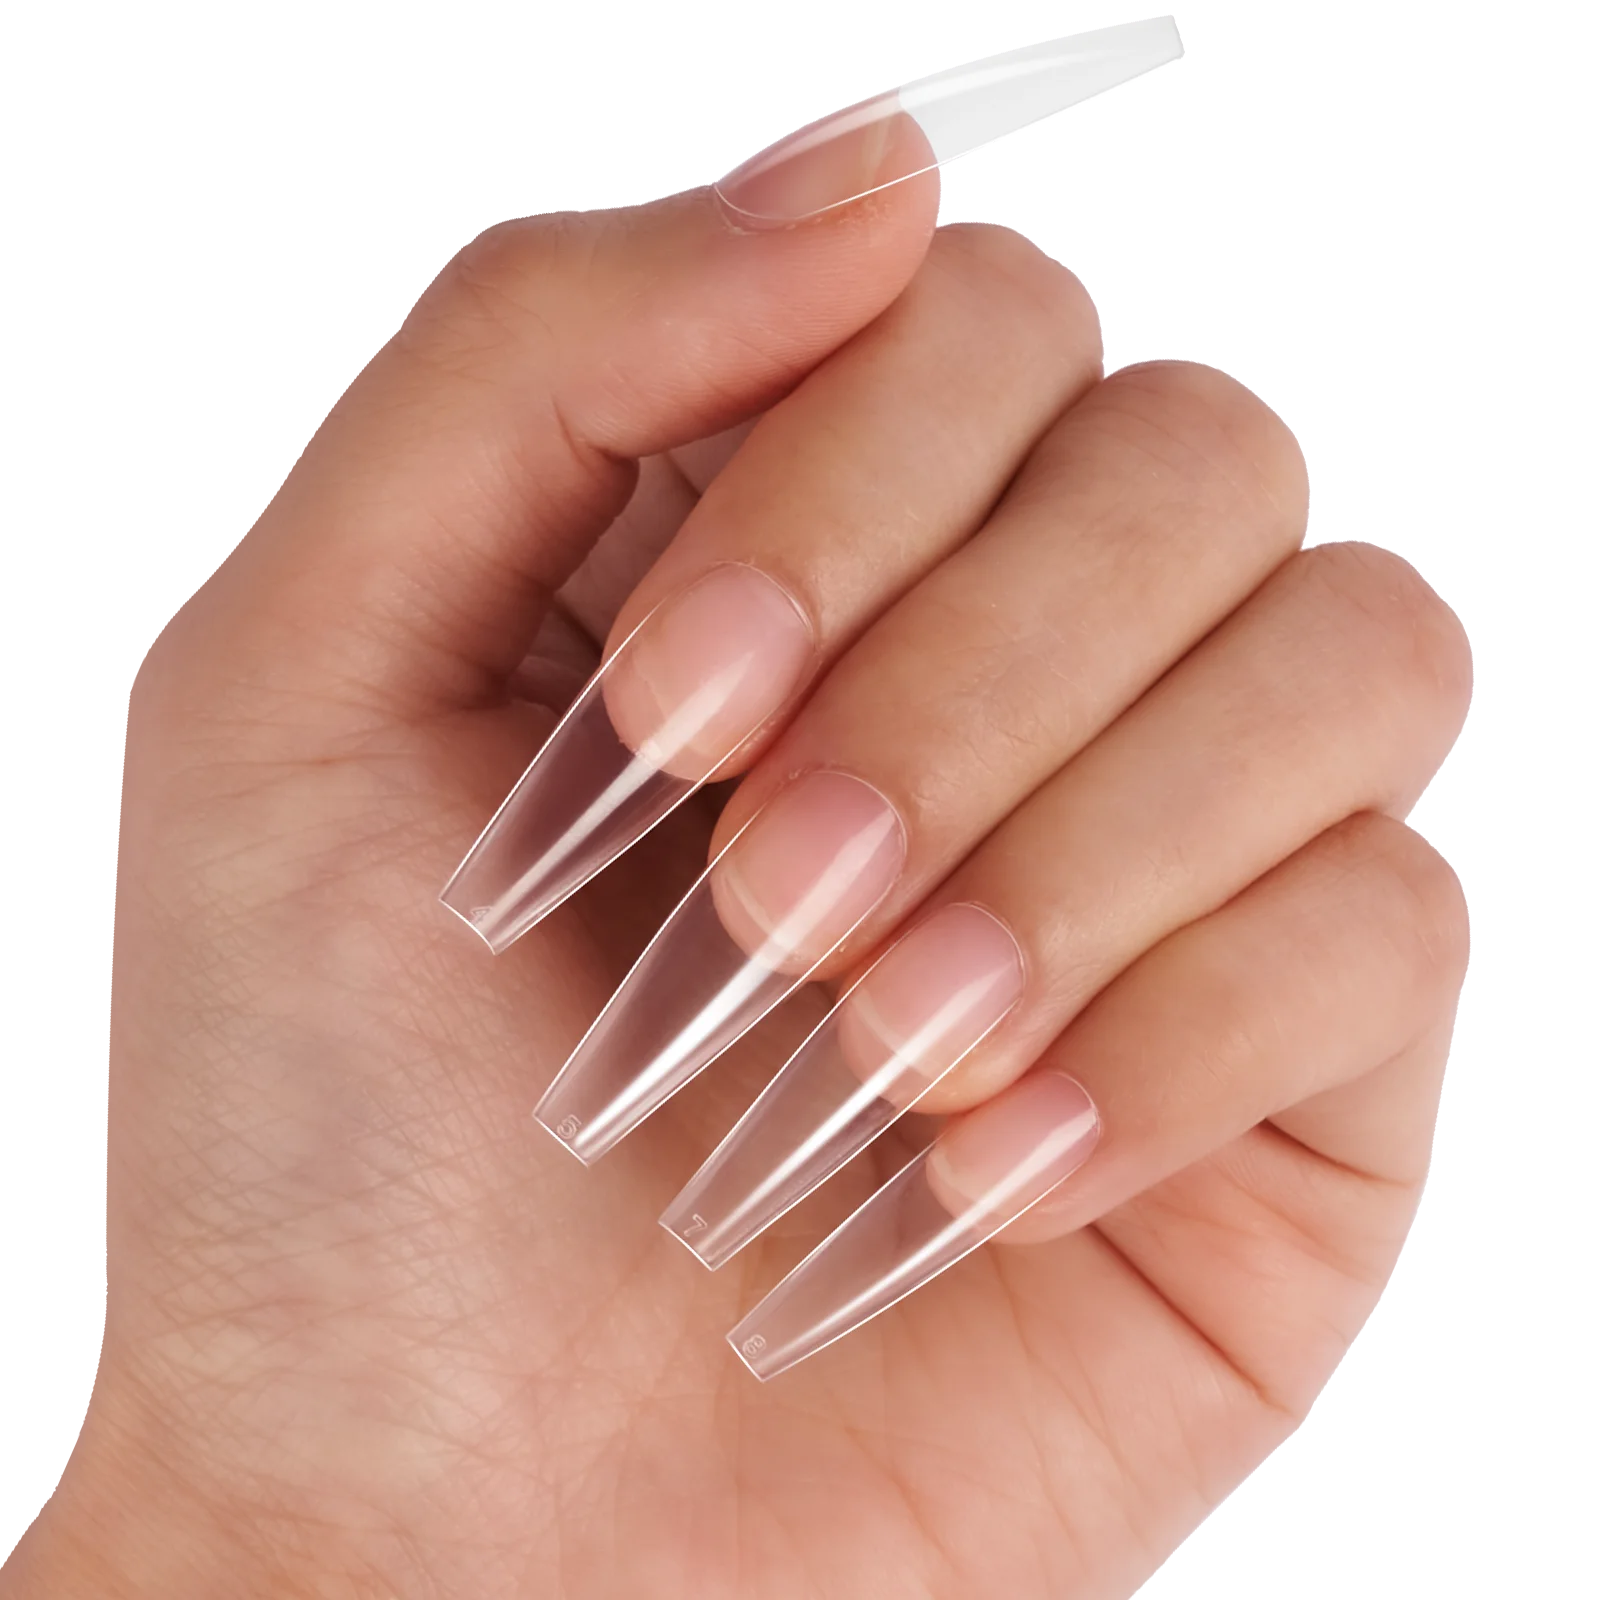 

500Pcs/ Box BTArtbox Hot Sale Clear Fake Nails Coffin Shape Full Half Cover Stiletto Nail Tips Artificial Fingernails, Clear natural